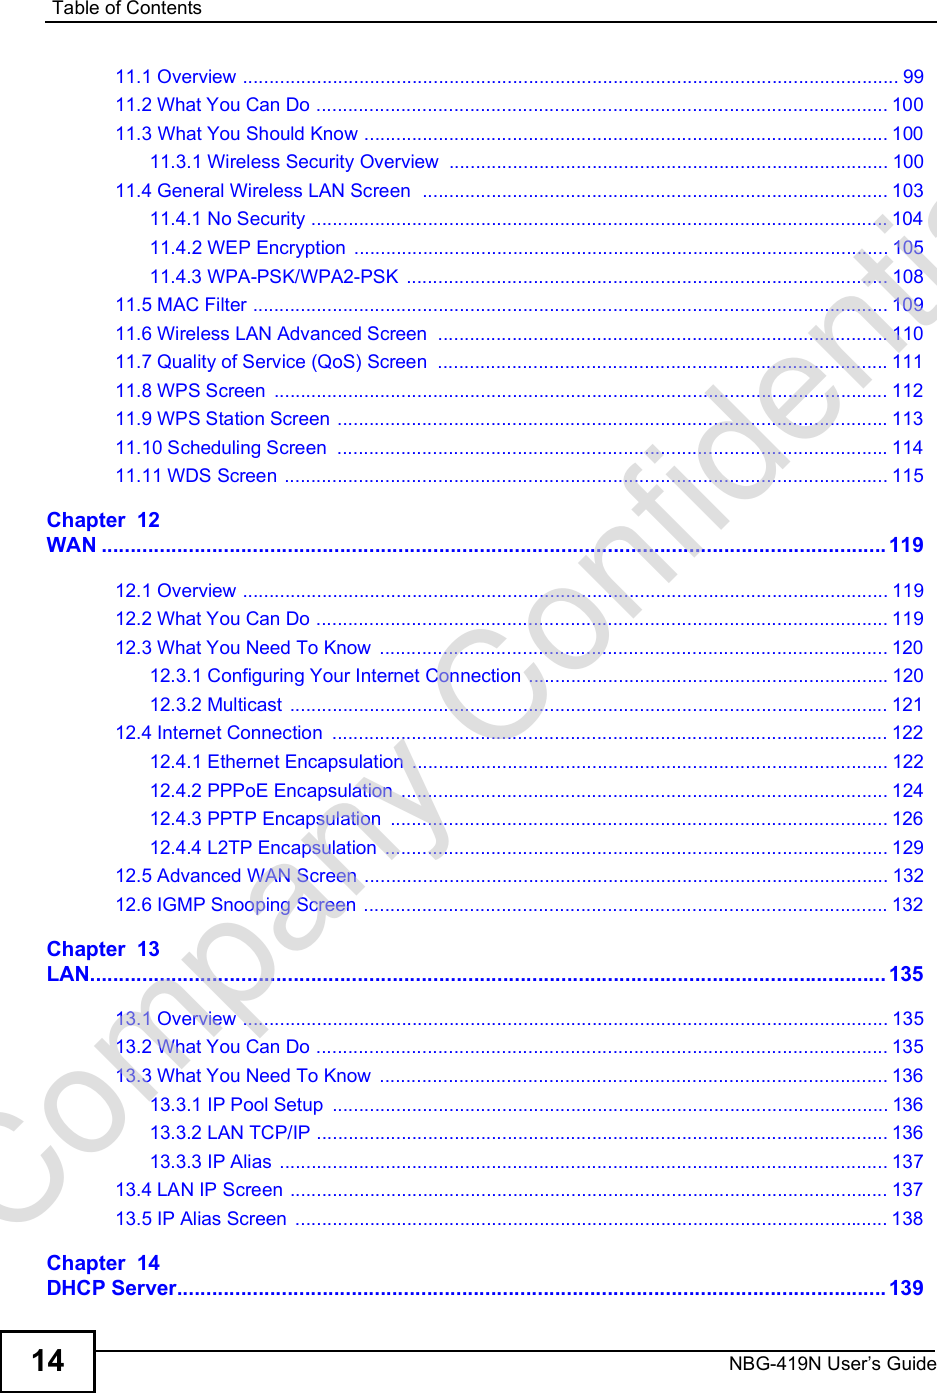 Table of ContentsNBG-419N User s Guide1411.1 Overview ............................................................................................................................9911.2 What You Can Do ............................................................................................................10011.3 What You Should Know ...................................................................................................10011.3.1 Wireless Security Overview ...................................................................................10011.4 General Wireless LAN Screen  ........................................................................................10311.4.1 No Security .............................................................................................................10411.4.2 WEP Encryption .....................................................................................................10511.4.3 WPA-PSK/WPA2-PSK ...........................................................................................10811.5 MAC Filter ........................................................................................................................10911.6 Wireless LAN Advanced Screen .....................................................................................11011.7 Quality of Service (QoS) Screen .....................................................................................11111.8 WPS Screen ....................................................................................................................11211.9 WPS Station Screen ........................................................................................................11311.10 Scheduling Screen ........................................................................................................11411.11 WDS Screen ..................................................................................................................115Chapter  12WAN.......................................................................................................................................11912.1 Overview ..........................................................................................................................11912.2 What You Can Do ............................................................................................................11912.3 What You Need To Know ................................................................................................12012.3.1 Configuring Your Internet Connection ....................................................................12012.3.2 Multicast .................................................................................................................12112.4 Internet Connection .........................................................................................................12212.4.1 Ethernet Encapsulation ..........................................................................................12212.4.2 PPPoE Encapsulation ............................................................................................12412.4.3 PPTP Encapsulation ..............................................................................................12612.4.4 L2TP Encapsulation ...............................................................................................12912.5 Advanced WAN Screen ...................................................................................................13212.6 IGMP Snooping Screen ...................................................................................................132Chapter  13LAN.........................................................................................................................................13513.1 Overview ..........................................................................................................................13513.2 What You Can Do ............................................................................................................13513.3 What You Need To Know ................................................................................................13613.3.1 IP Pool Setup .........................................................................................................13613.3.2 LAN TCP/IP ............................................................................................................13613.3.3 IP Alias ...................................................................................................................13713.4 LAN IP Screen .................................................................................................................13713.5 IP Alias Screen ................................................................................................................138Chapter  14DHCP Server..........................................................................................................................139Company Confidential